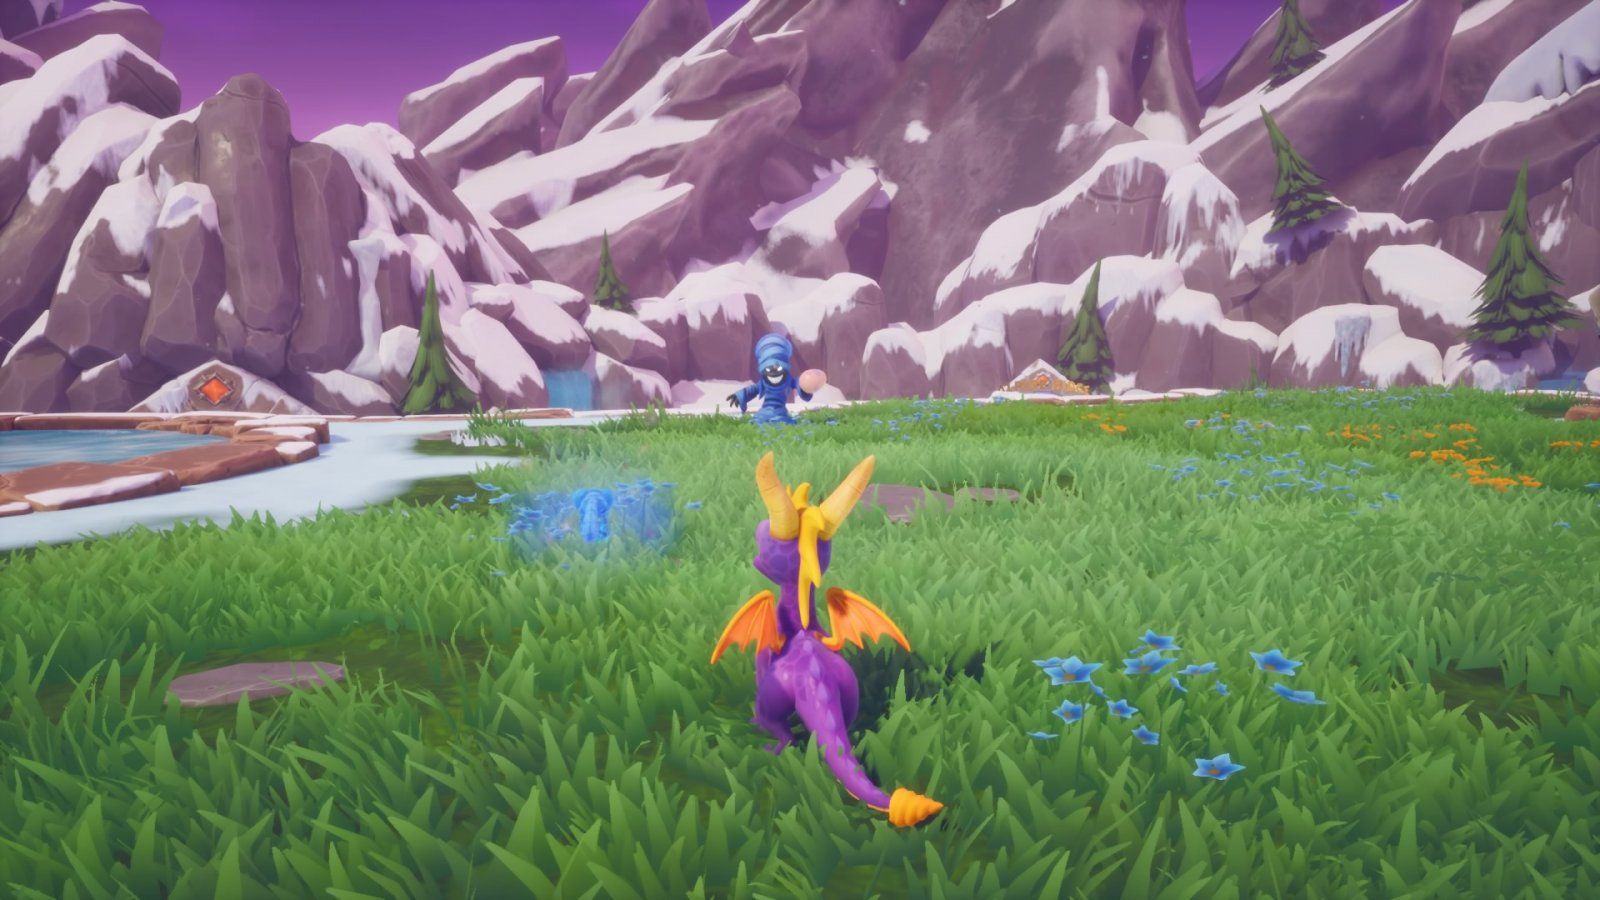 Spyro reignites an old flame that burns brighter than we remember